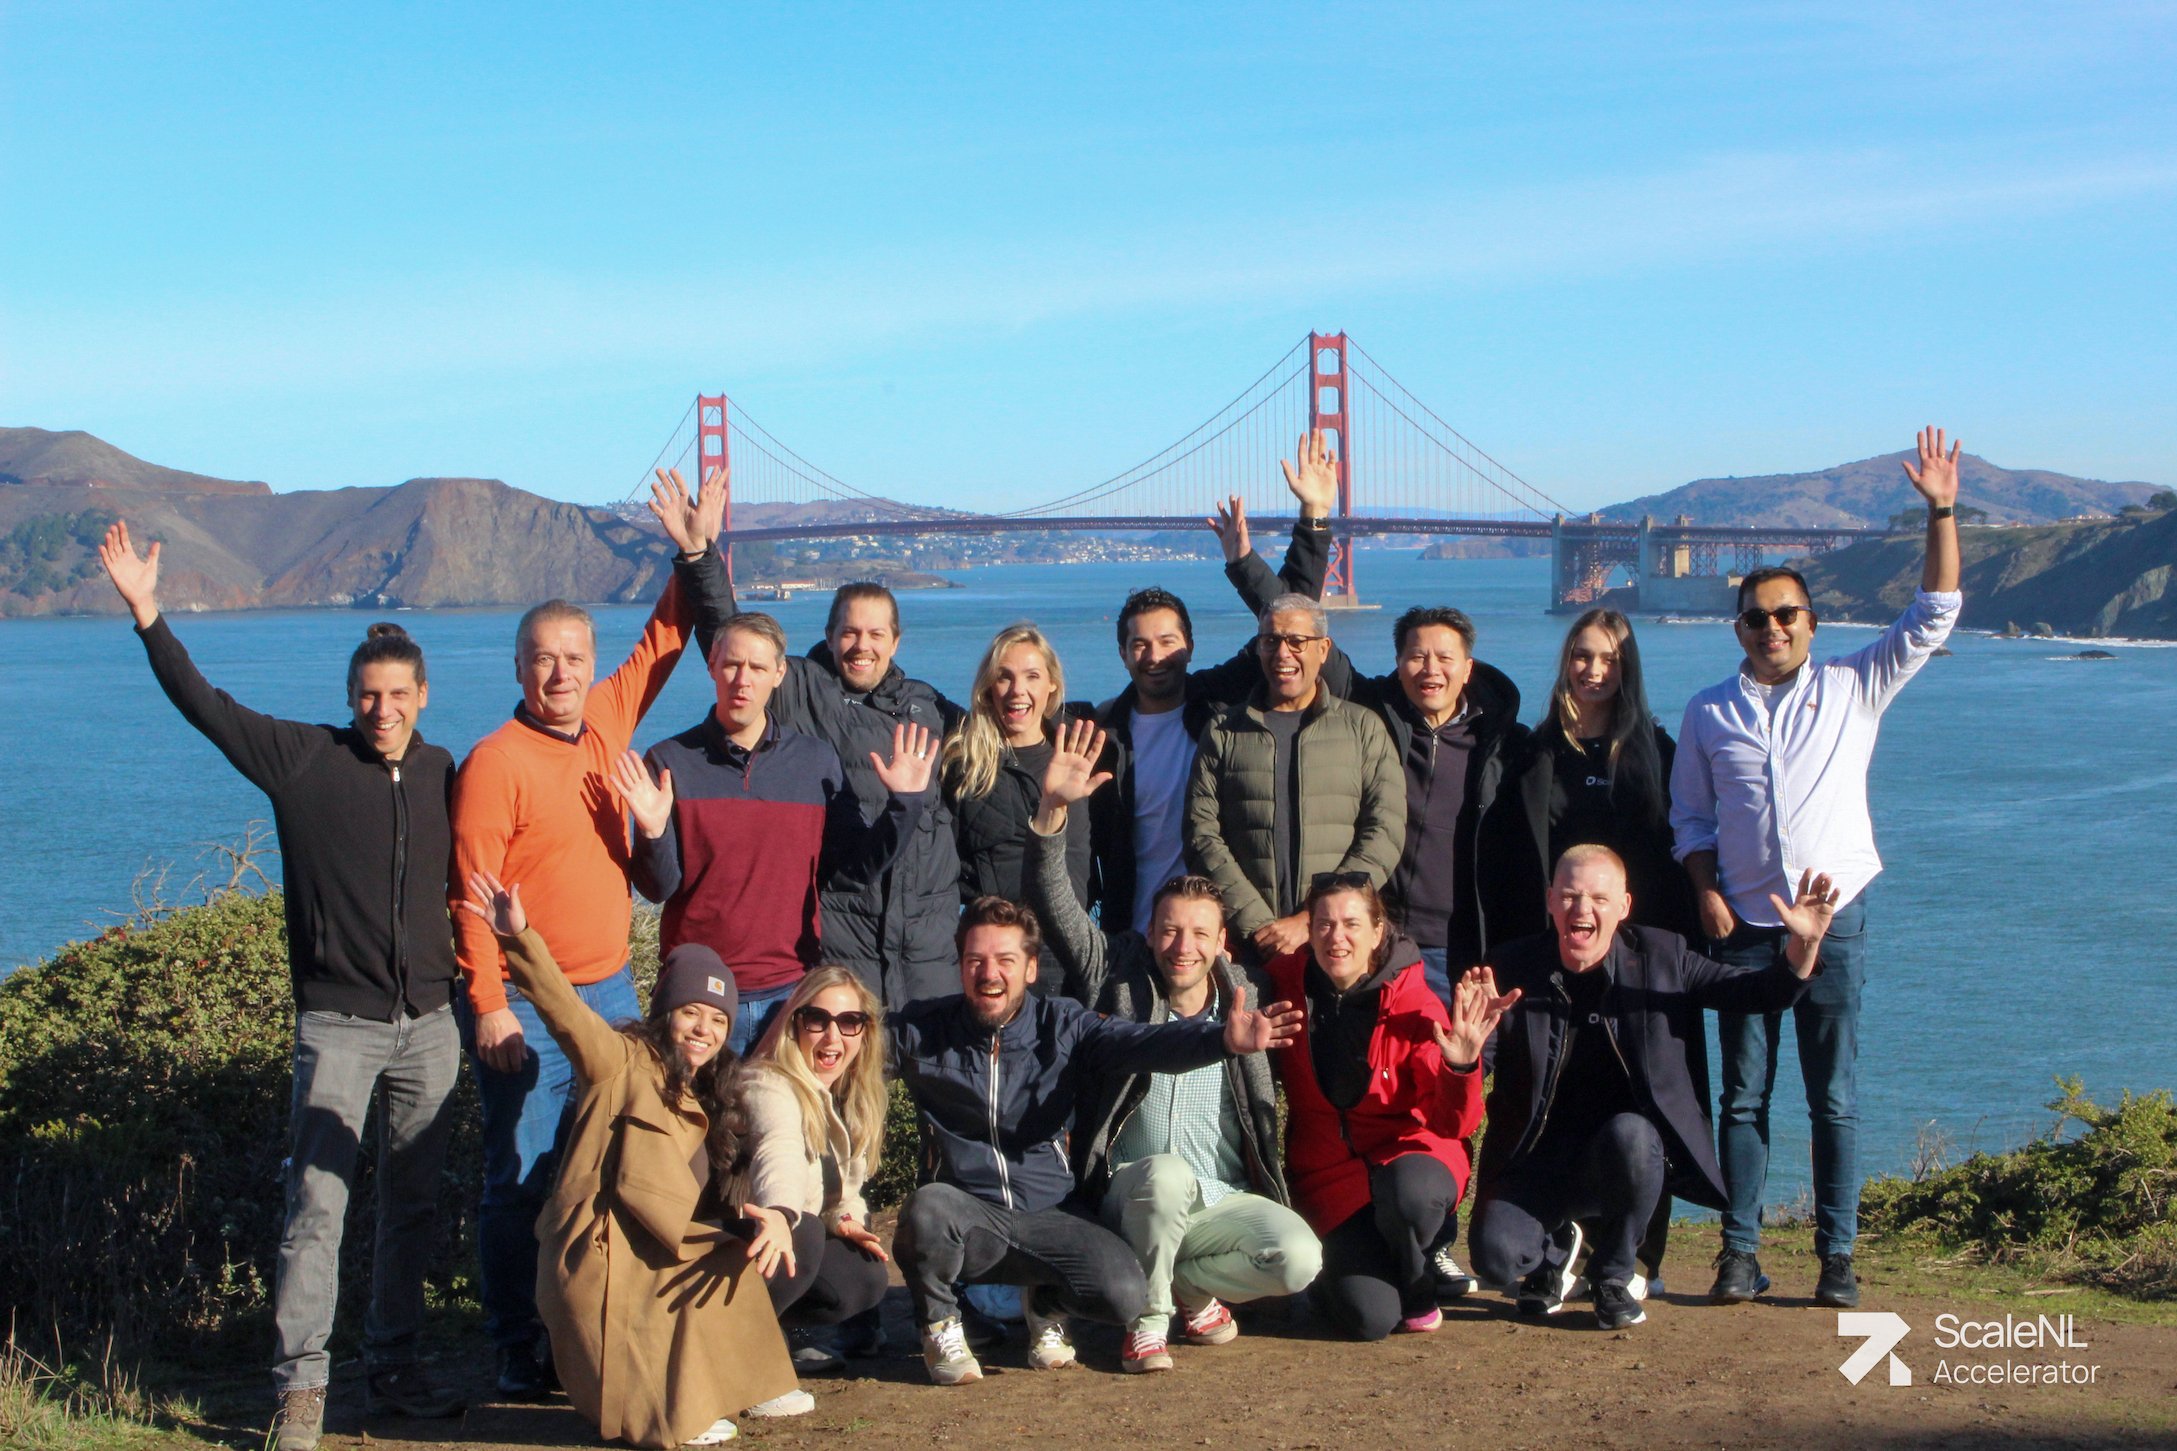 ScaleNL founders on the background of Golden Gate Bridge in San Francisco